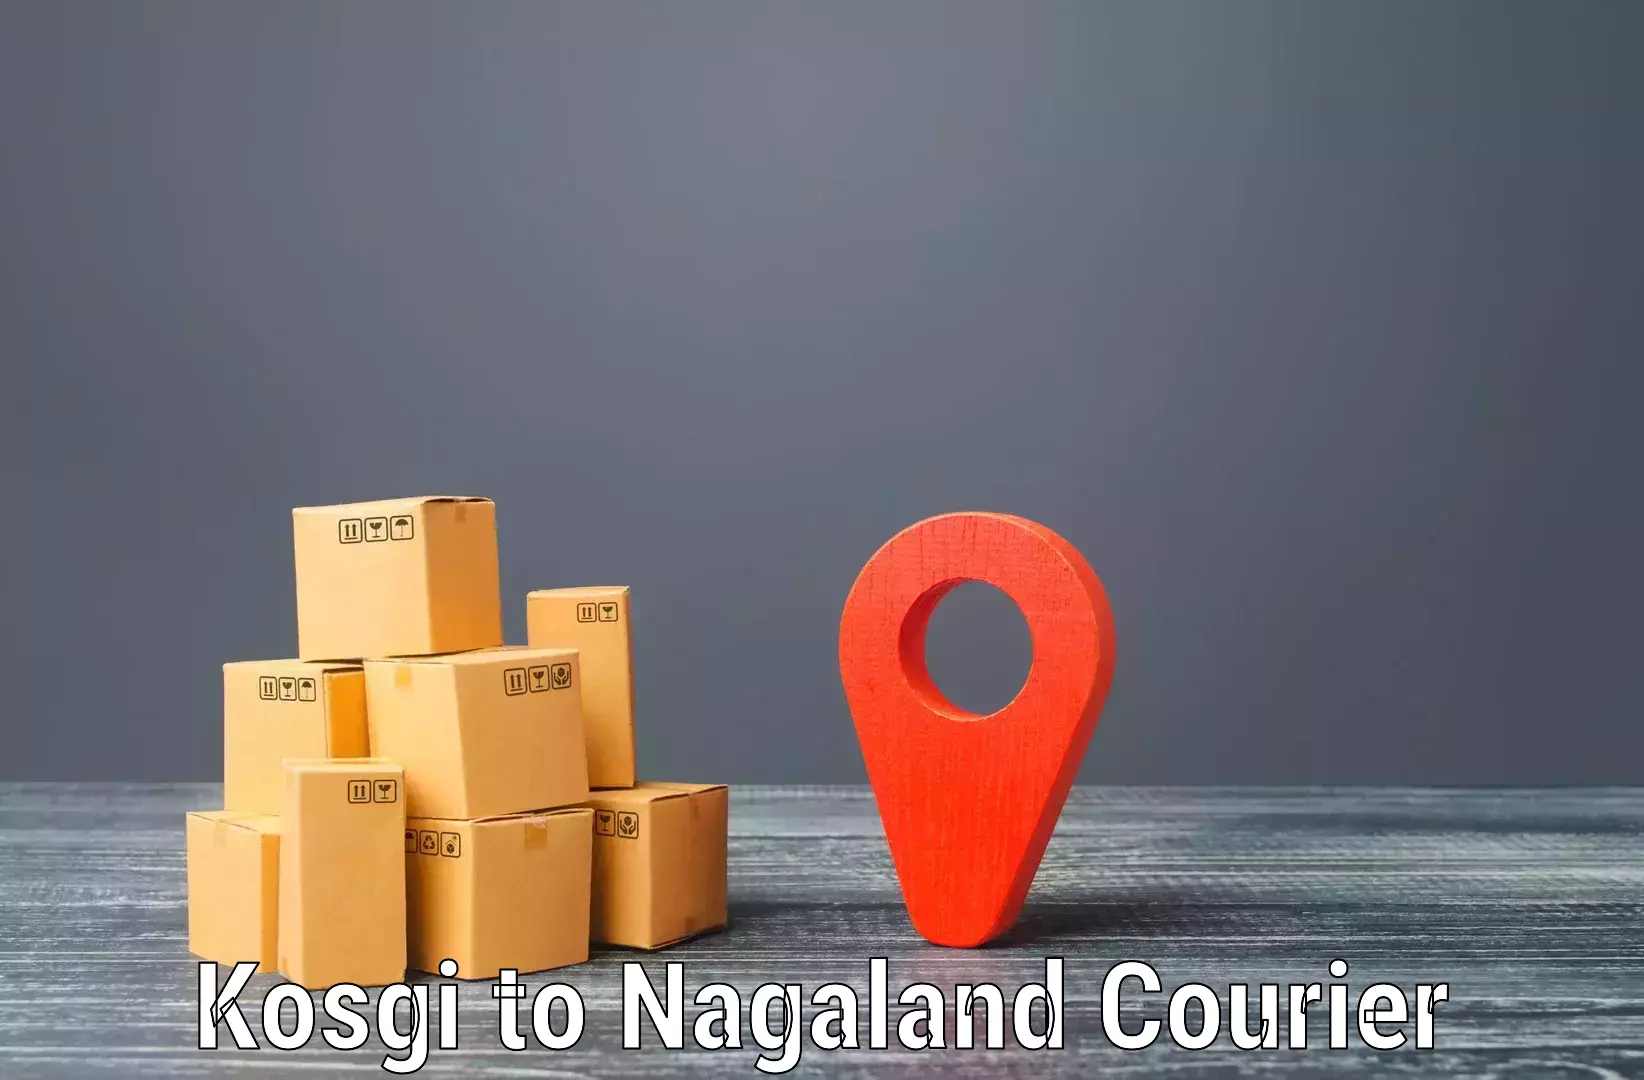 Same-day delivery solutions Kosgi to Nagaland